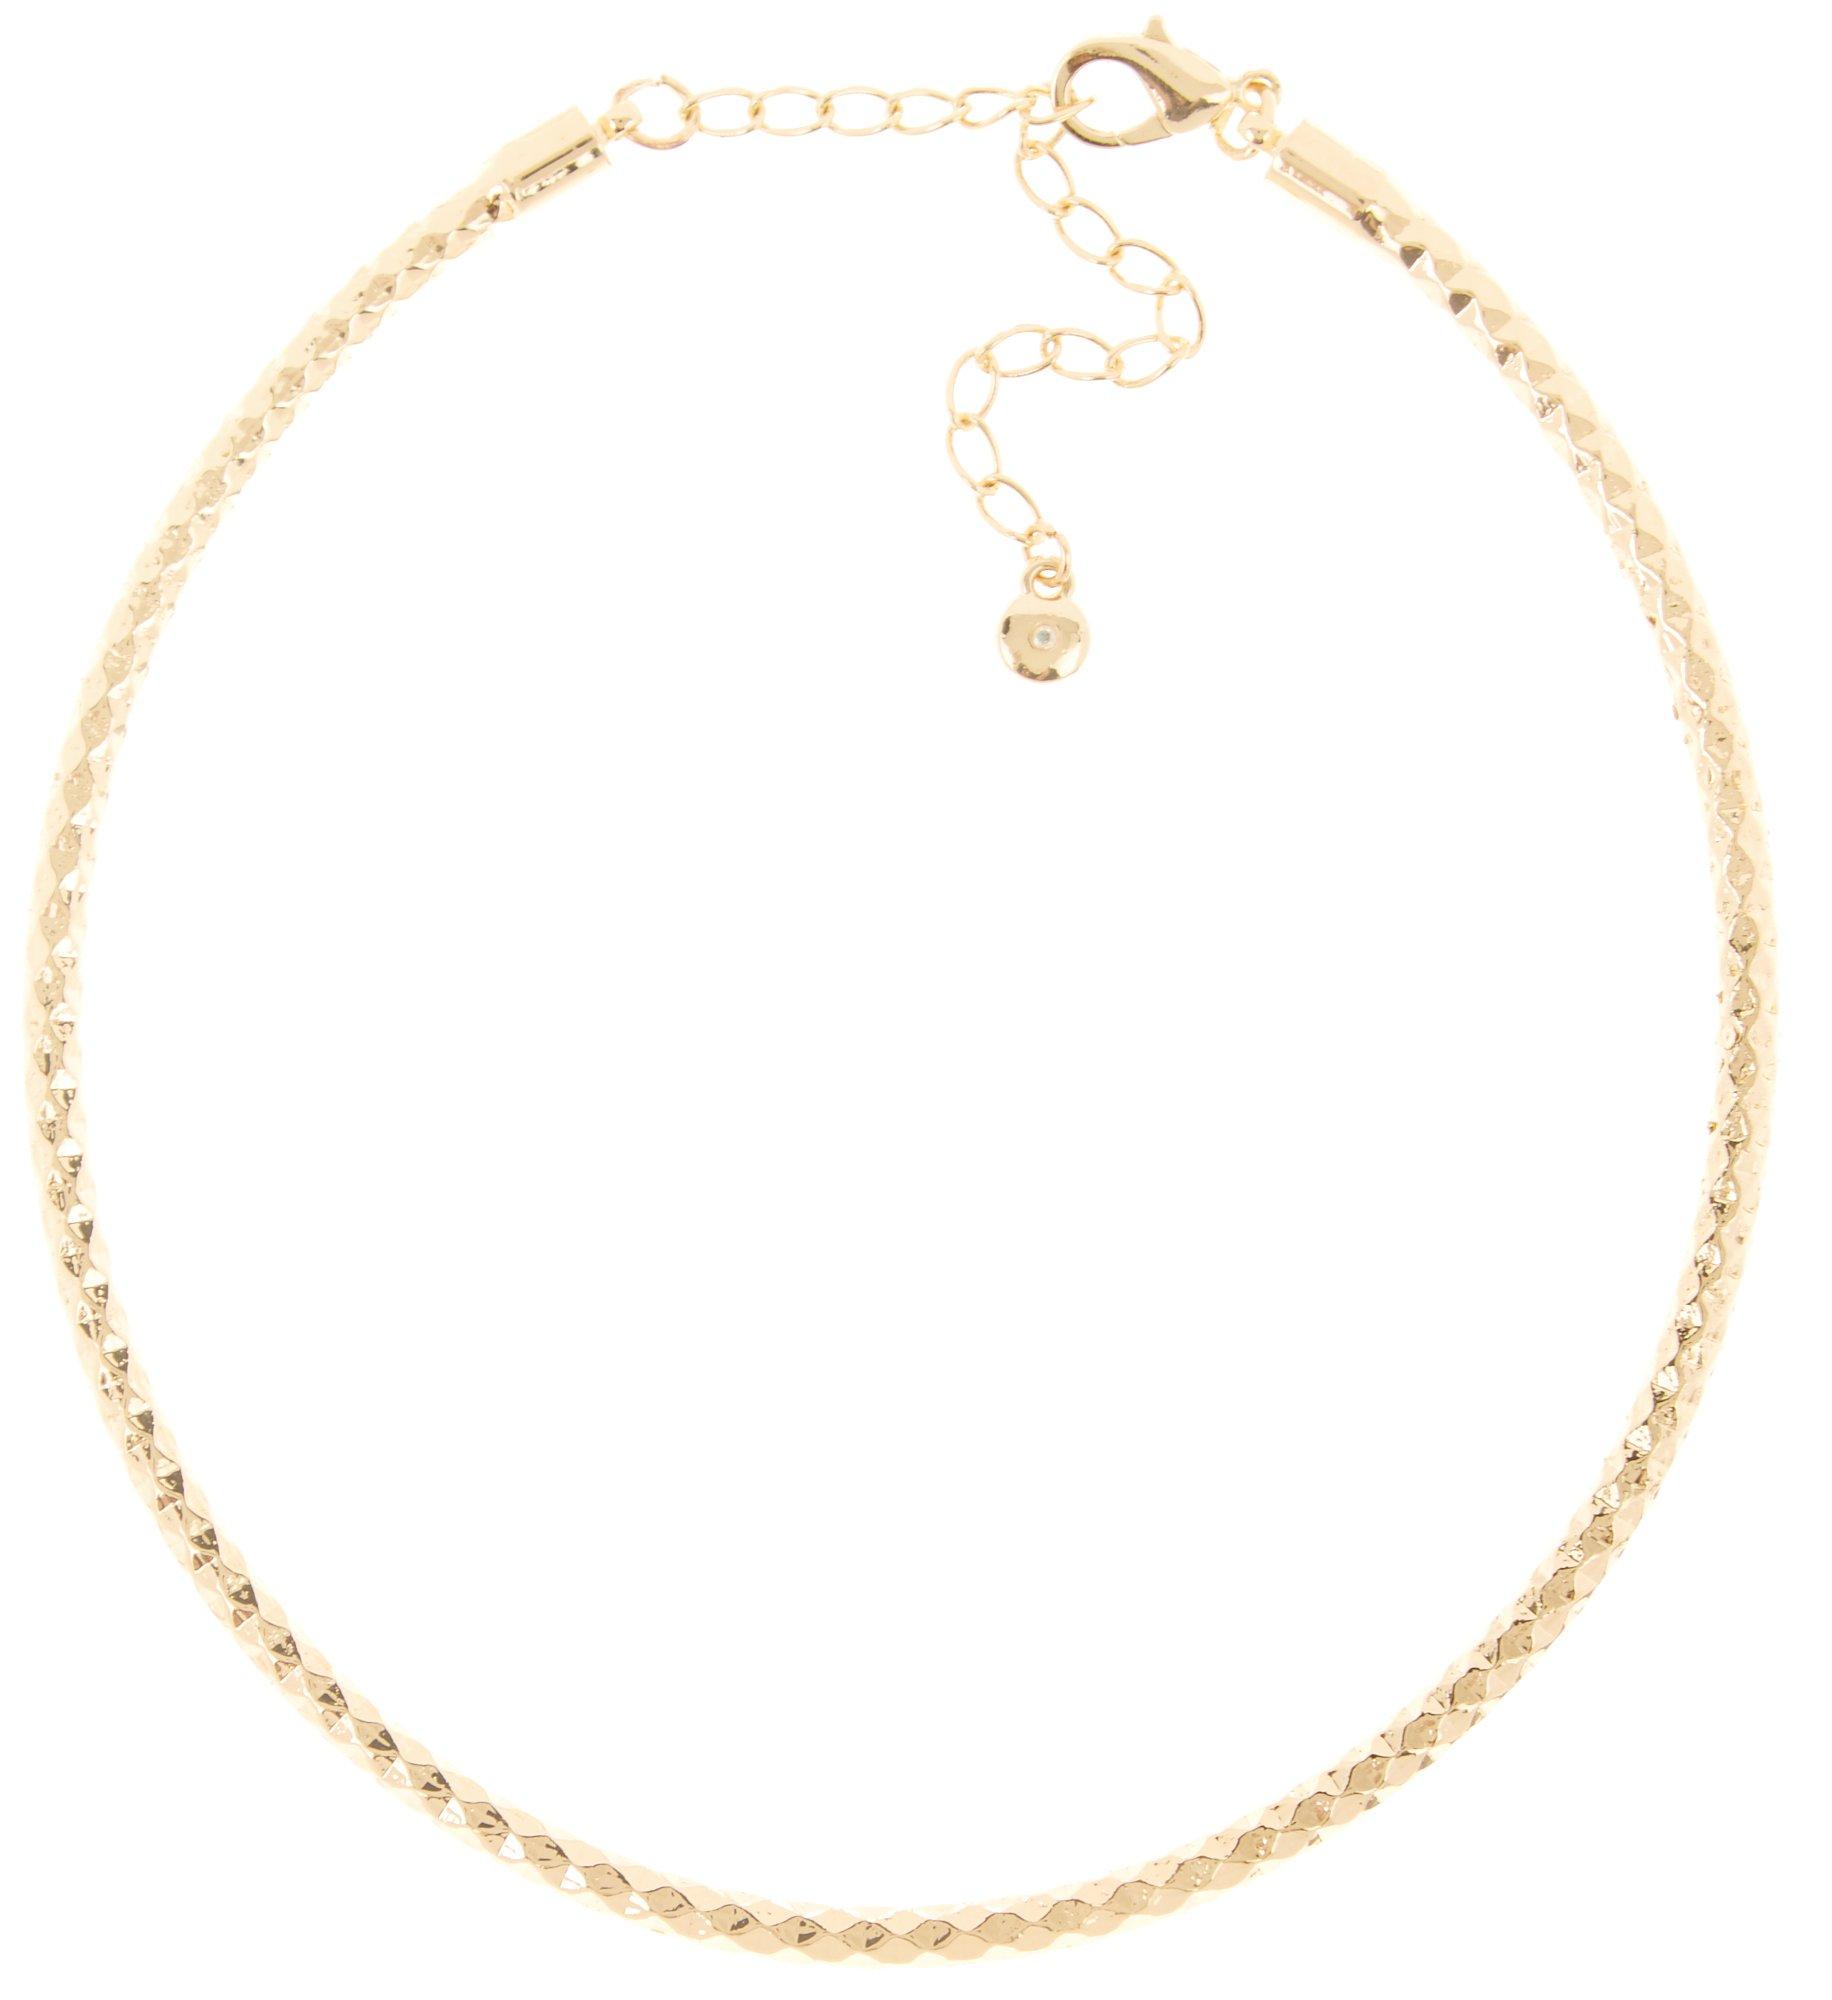 By Roman Gold Tone Textured Collar Necklace